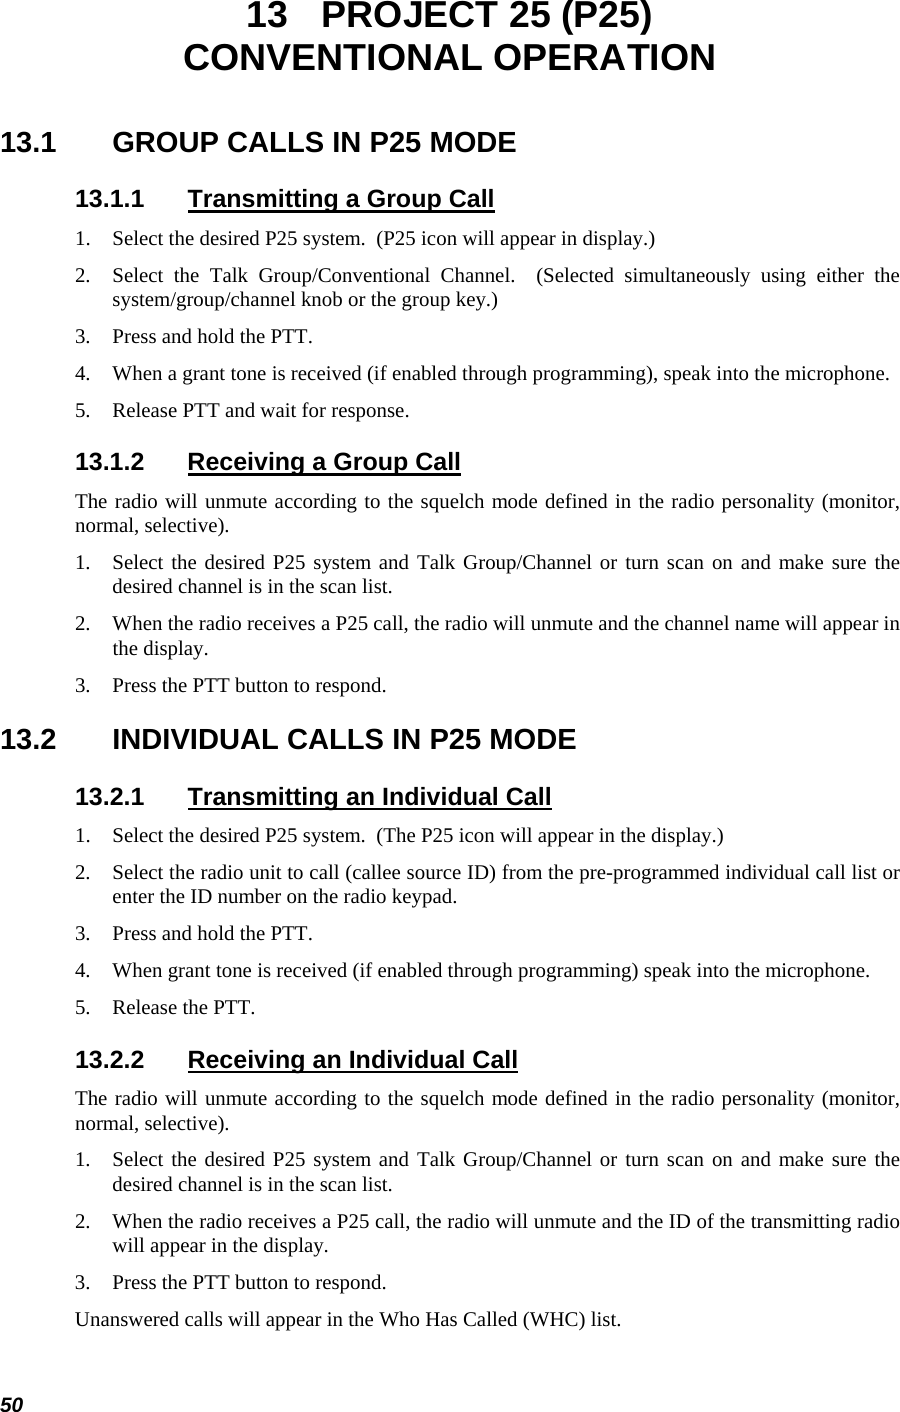  50 13  PROJECT 25 (P25) CONVENTIONAL OPERATION 13.1  GROUP CALLS IN P25 MODE 13.1.1  Transmitting a Group Call 1.  Select the desired P25 system.  (P25 icon will appear in display.) 2.  Select the Talk Group/Conventional Channel.  (Selected simultaneously using either the system/group/channel knob or the group key.) 3.  Press and hold the PTT. 4.  When a grant tone is received (if enabled through programming), speak into the microphone. 5.  Release PTT and wait for response. 13.1.2  Receiving a Group Call The radio will unmute according to the squelch mode defined in the radio personality (monitor, normal, selective). 1.  Select the desired P25 system and Talk Group/Channel or turn scan on and make sure the desired channel is in the scan list. 2.  When the radio receives a P25 call, the radio will unmute and the channel name will appear in the display. 3.  Press the PTT button to respond. 13.2  INDIVIDUAL CALLS IN P25 MODE 13.2.1  Transmitting an Individual Call 1.  Select the desired P25 system.  (The P25 icon will appear in the display.) 2.  Select the radio unit to call (callee source ID) from the pre-programmed individual call list or enter the ID number on the radio keypad. 3.  Press and hold the PTT. 4.  When grant tone is received (if enabled through programming) speak into the microphone. 5.  Release the PTT. 13.2.2  Receiving an Individual Call The radio will unmute according to the squelch mode defined in the radio personality (monitor, normal, selective). 1.  Select the desired P25 system and Talk Group/Channel or turn scan on and make sure the desired channel is in the scan list. 2.  When the radio receives a P25 call, the radio will unmute and the ID of the transmitting radio will appear in the display. 3.  Press the PTT button to respond. Unanswered calls will appear in the Who Has Called (WHC) list. 